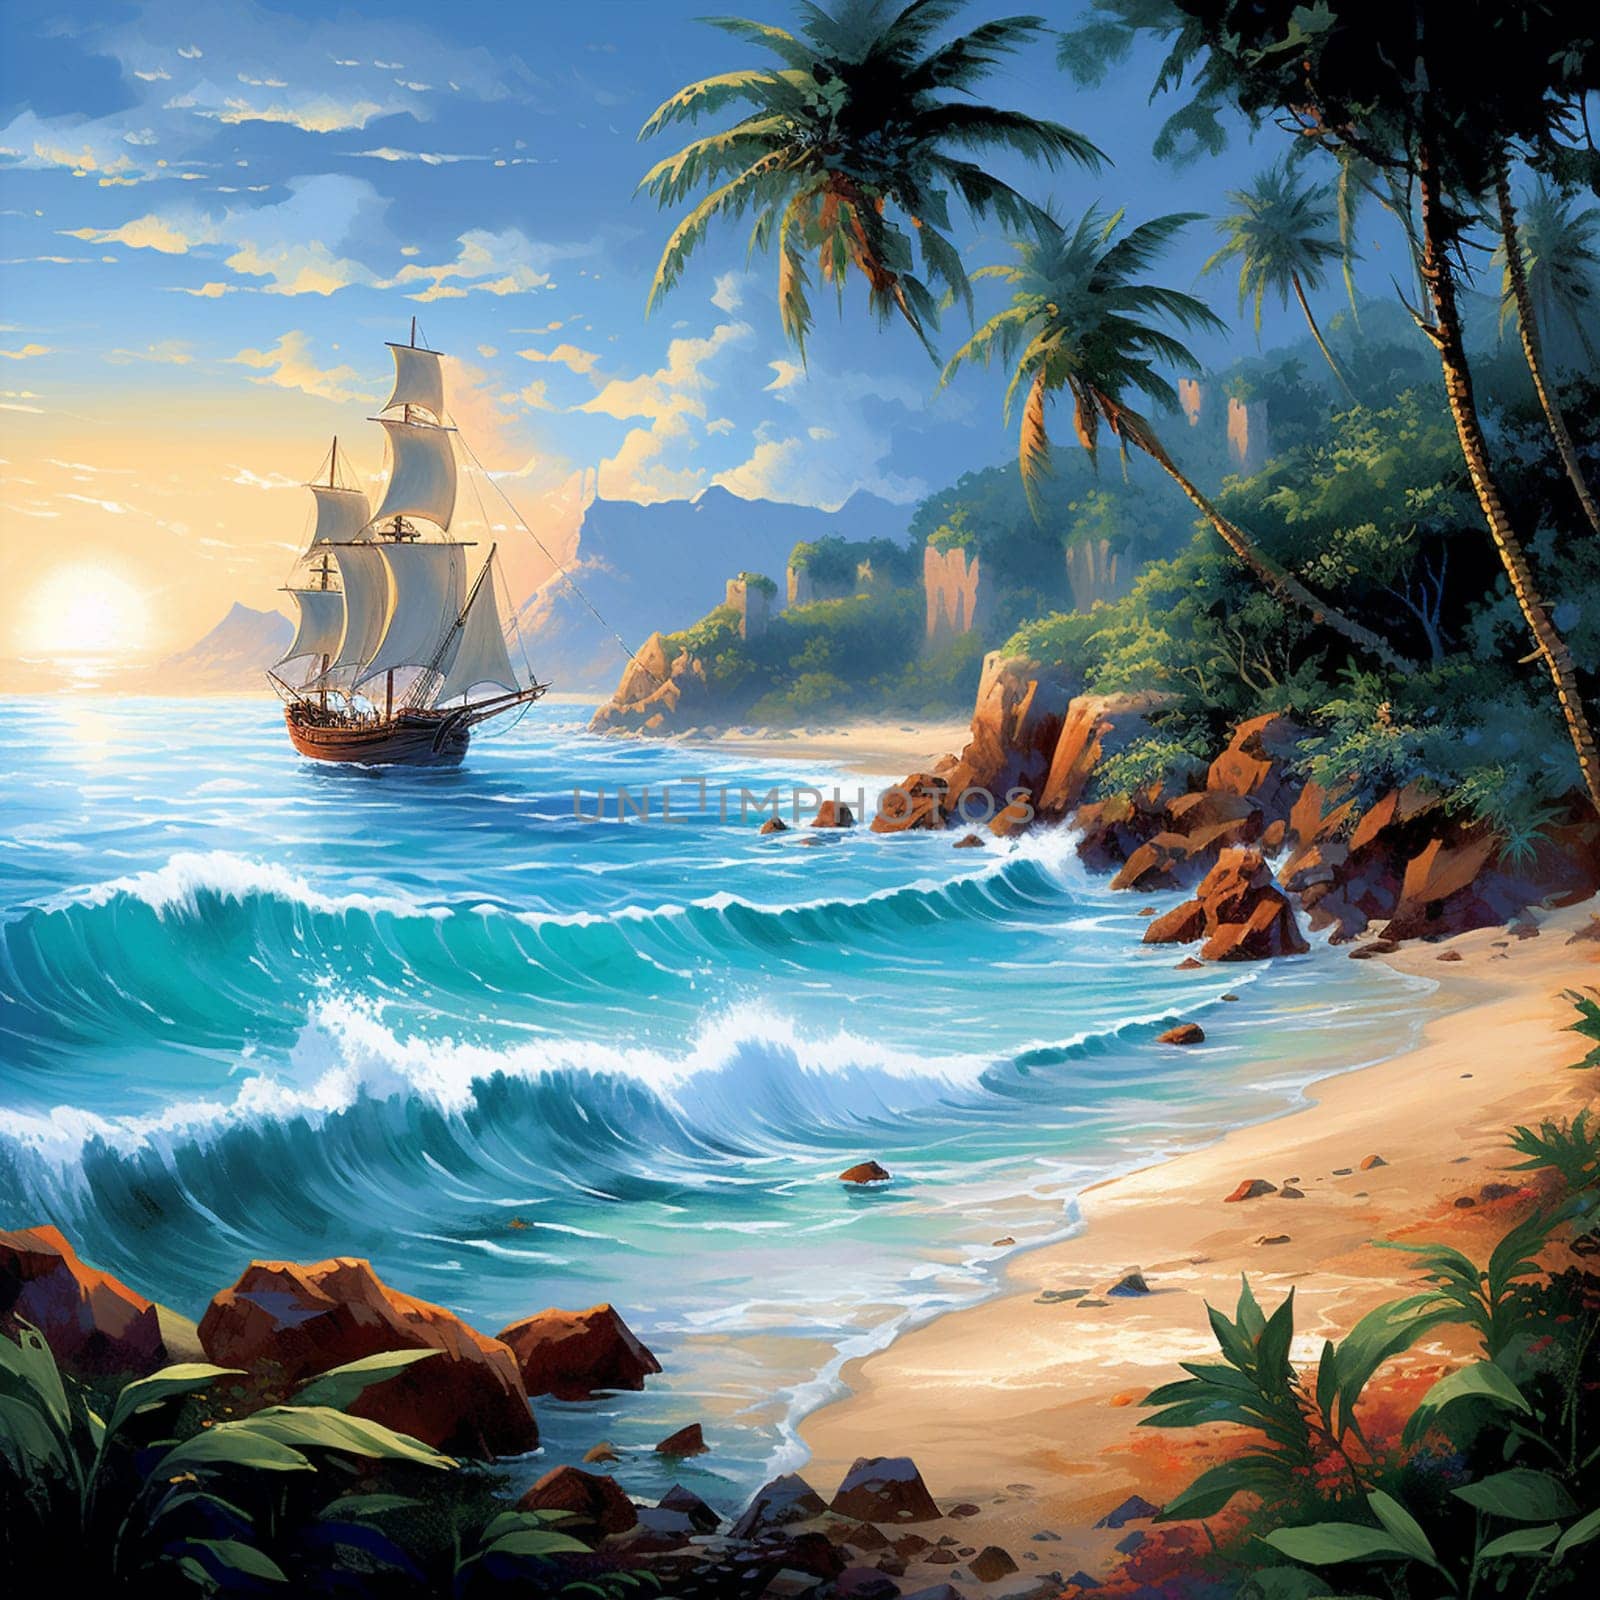 Get ready to embark on an adventure with this breathtaking artwork in a realistic art style. The image depicts a vast expanse of crystal-clear turquoise waters gently caressing a pristine, white sandy beach. In the distance, a rugged, towering cliff emerges from the ocean, adorned with lush, vibrant greenery. A lone sailboat elegantly glides across the waves, capturing the essence of adventure and discovery. The sky is a mesmerizing blend of warm oranges and pinks, illuminated by the last rays of a breathtaking sunset. This captivating image is sure to evoke wonder, wanderlust, and inspire dreams of embarking on an epic maritime journey.